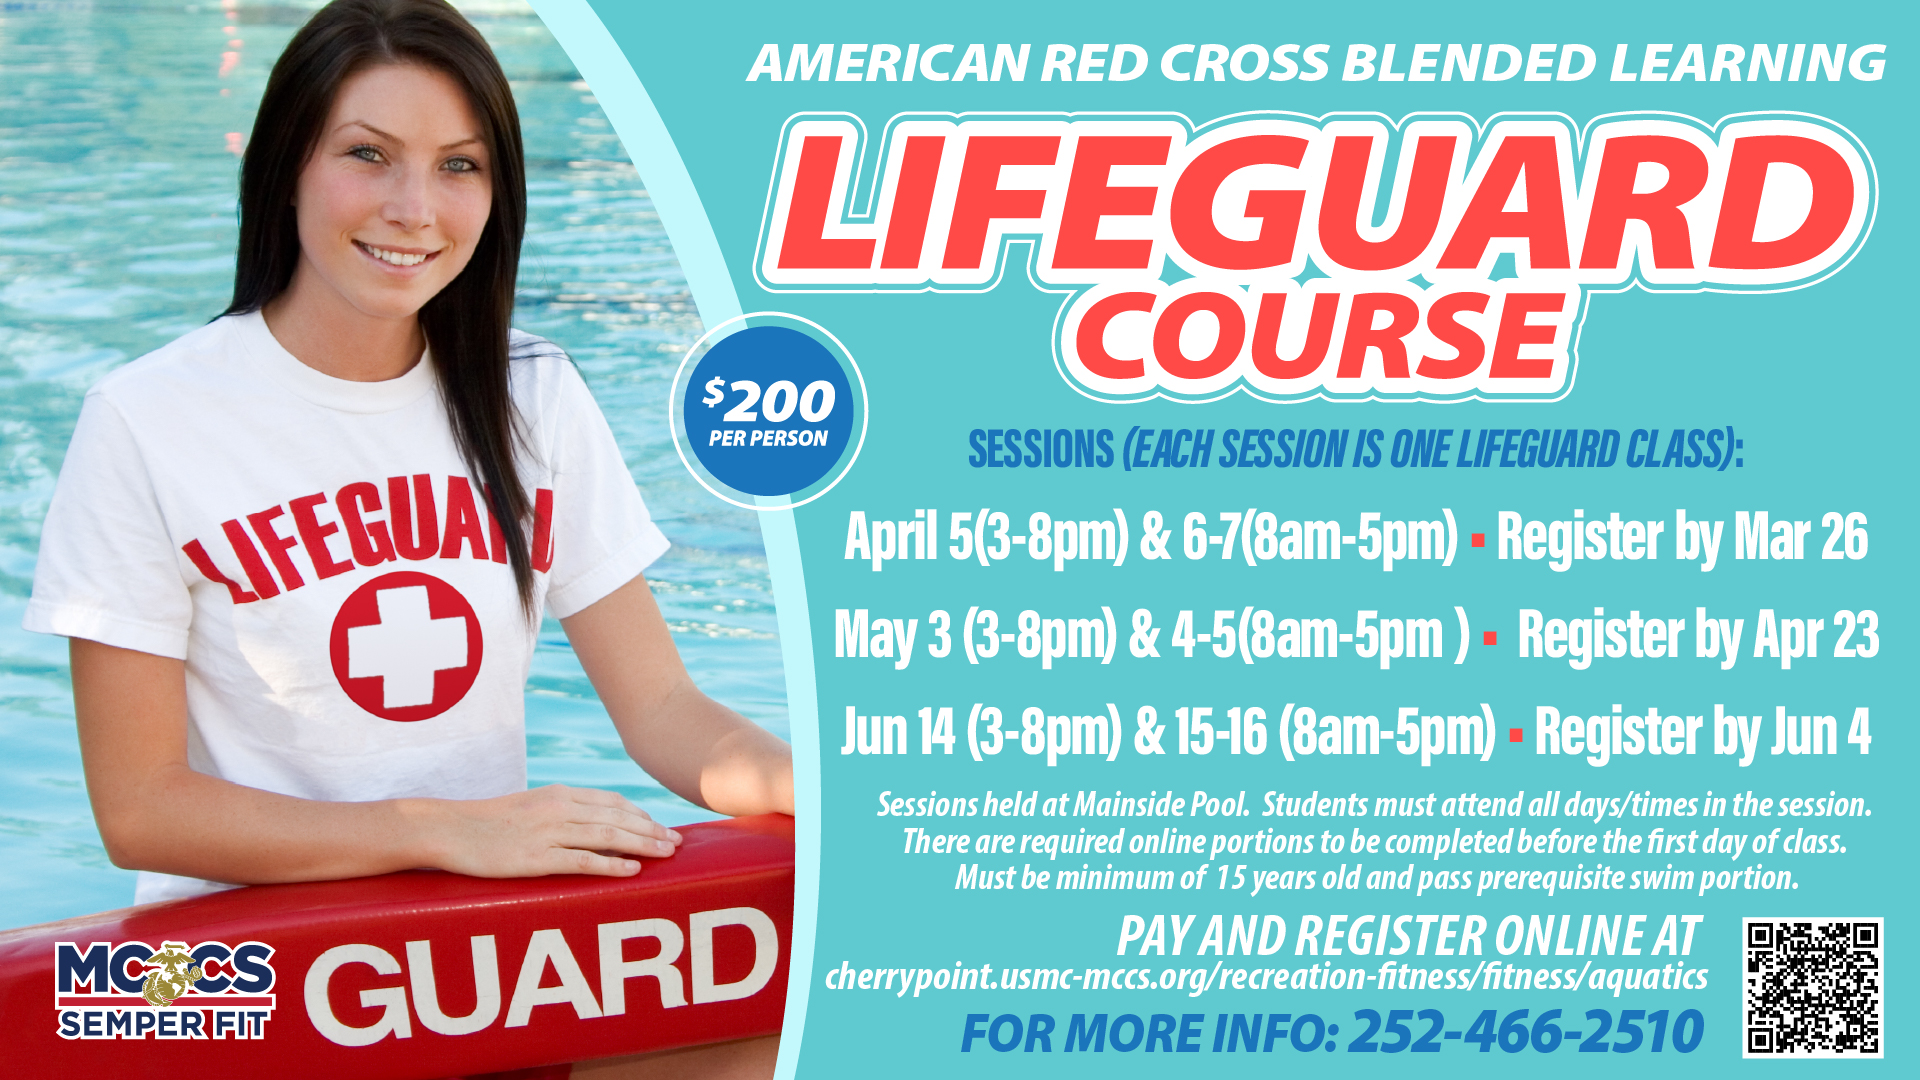 American Red Cross Blended Learning Lifeguard Course